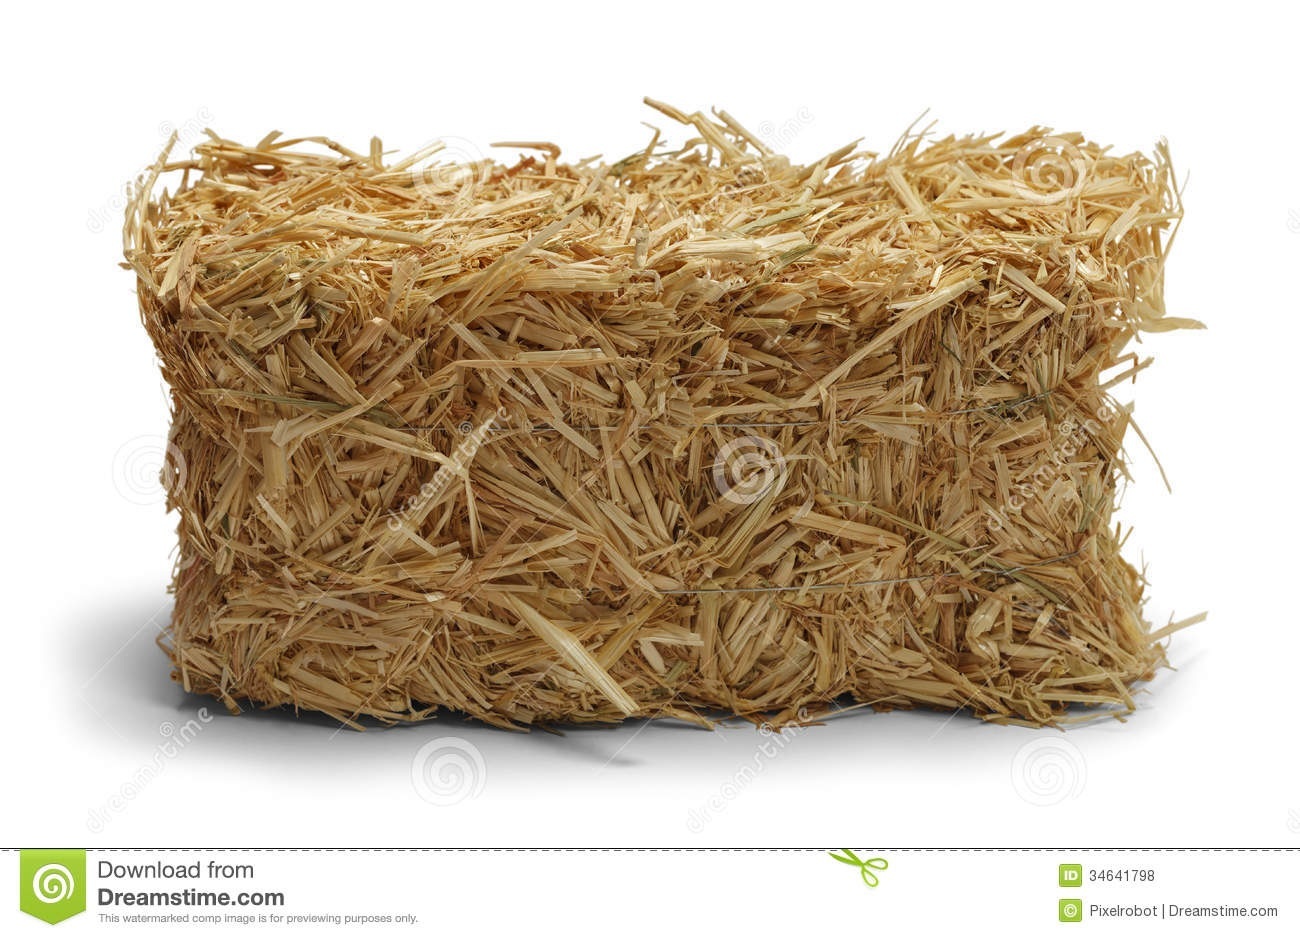 tractor-hay-bale-royalty-free-svg-cliparts-vectors-and-stock-clip